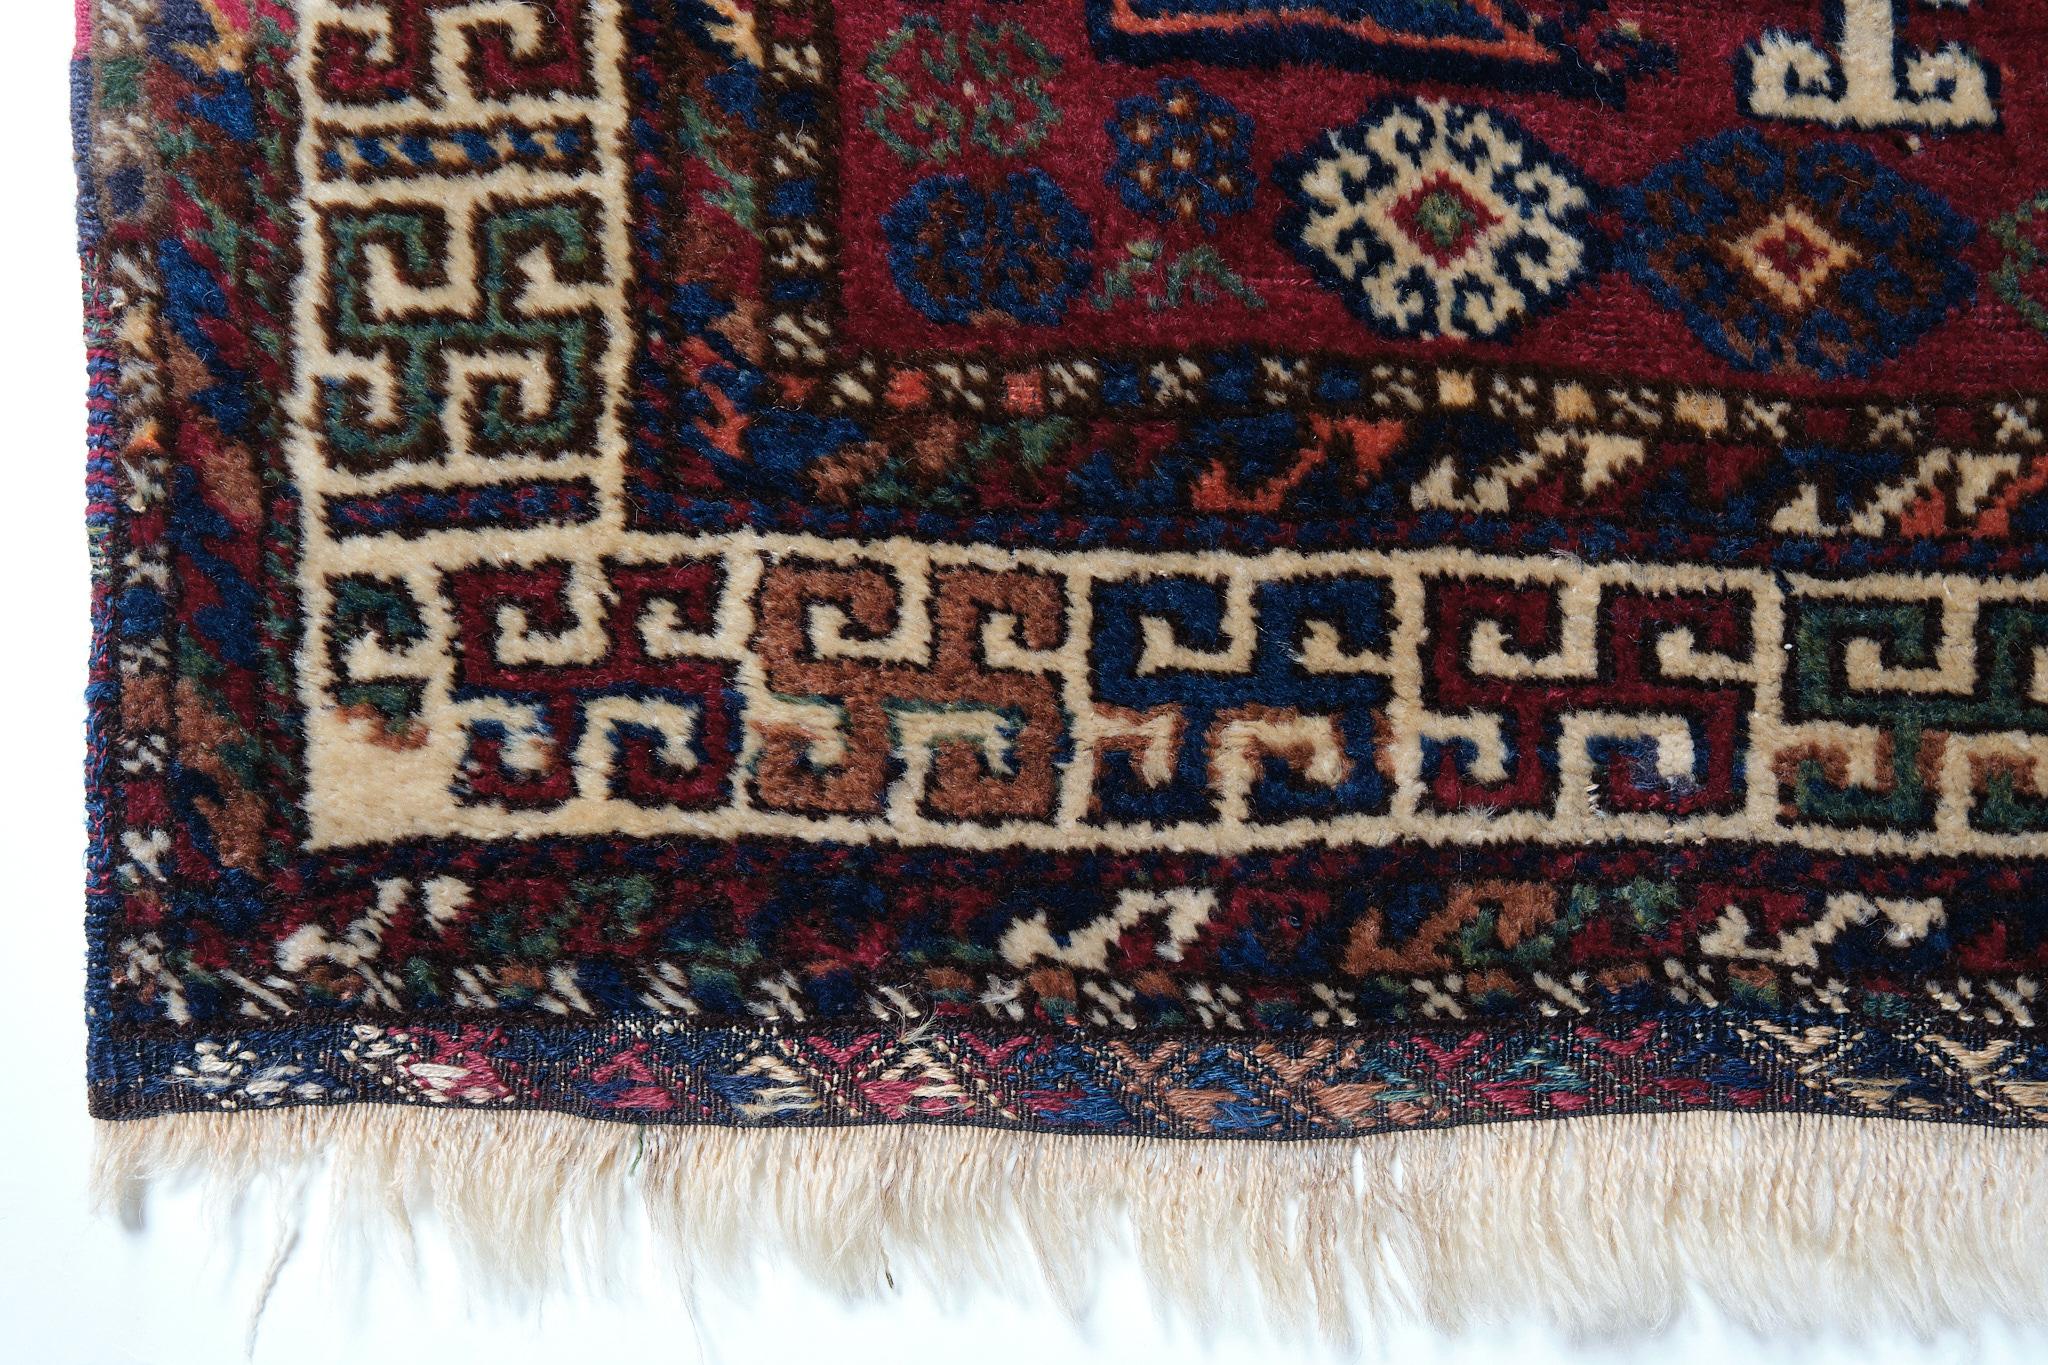 This is an antique Kurdish Herki runner rug from the Eastern Anatolia and Northern Iraqi region with a rare and beautiful color composition.

Iraqi Kurds are mainly concentrated within a mountainous region of north and north-east Iraq. Originally